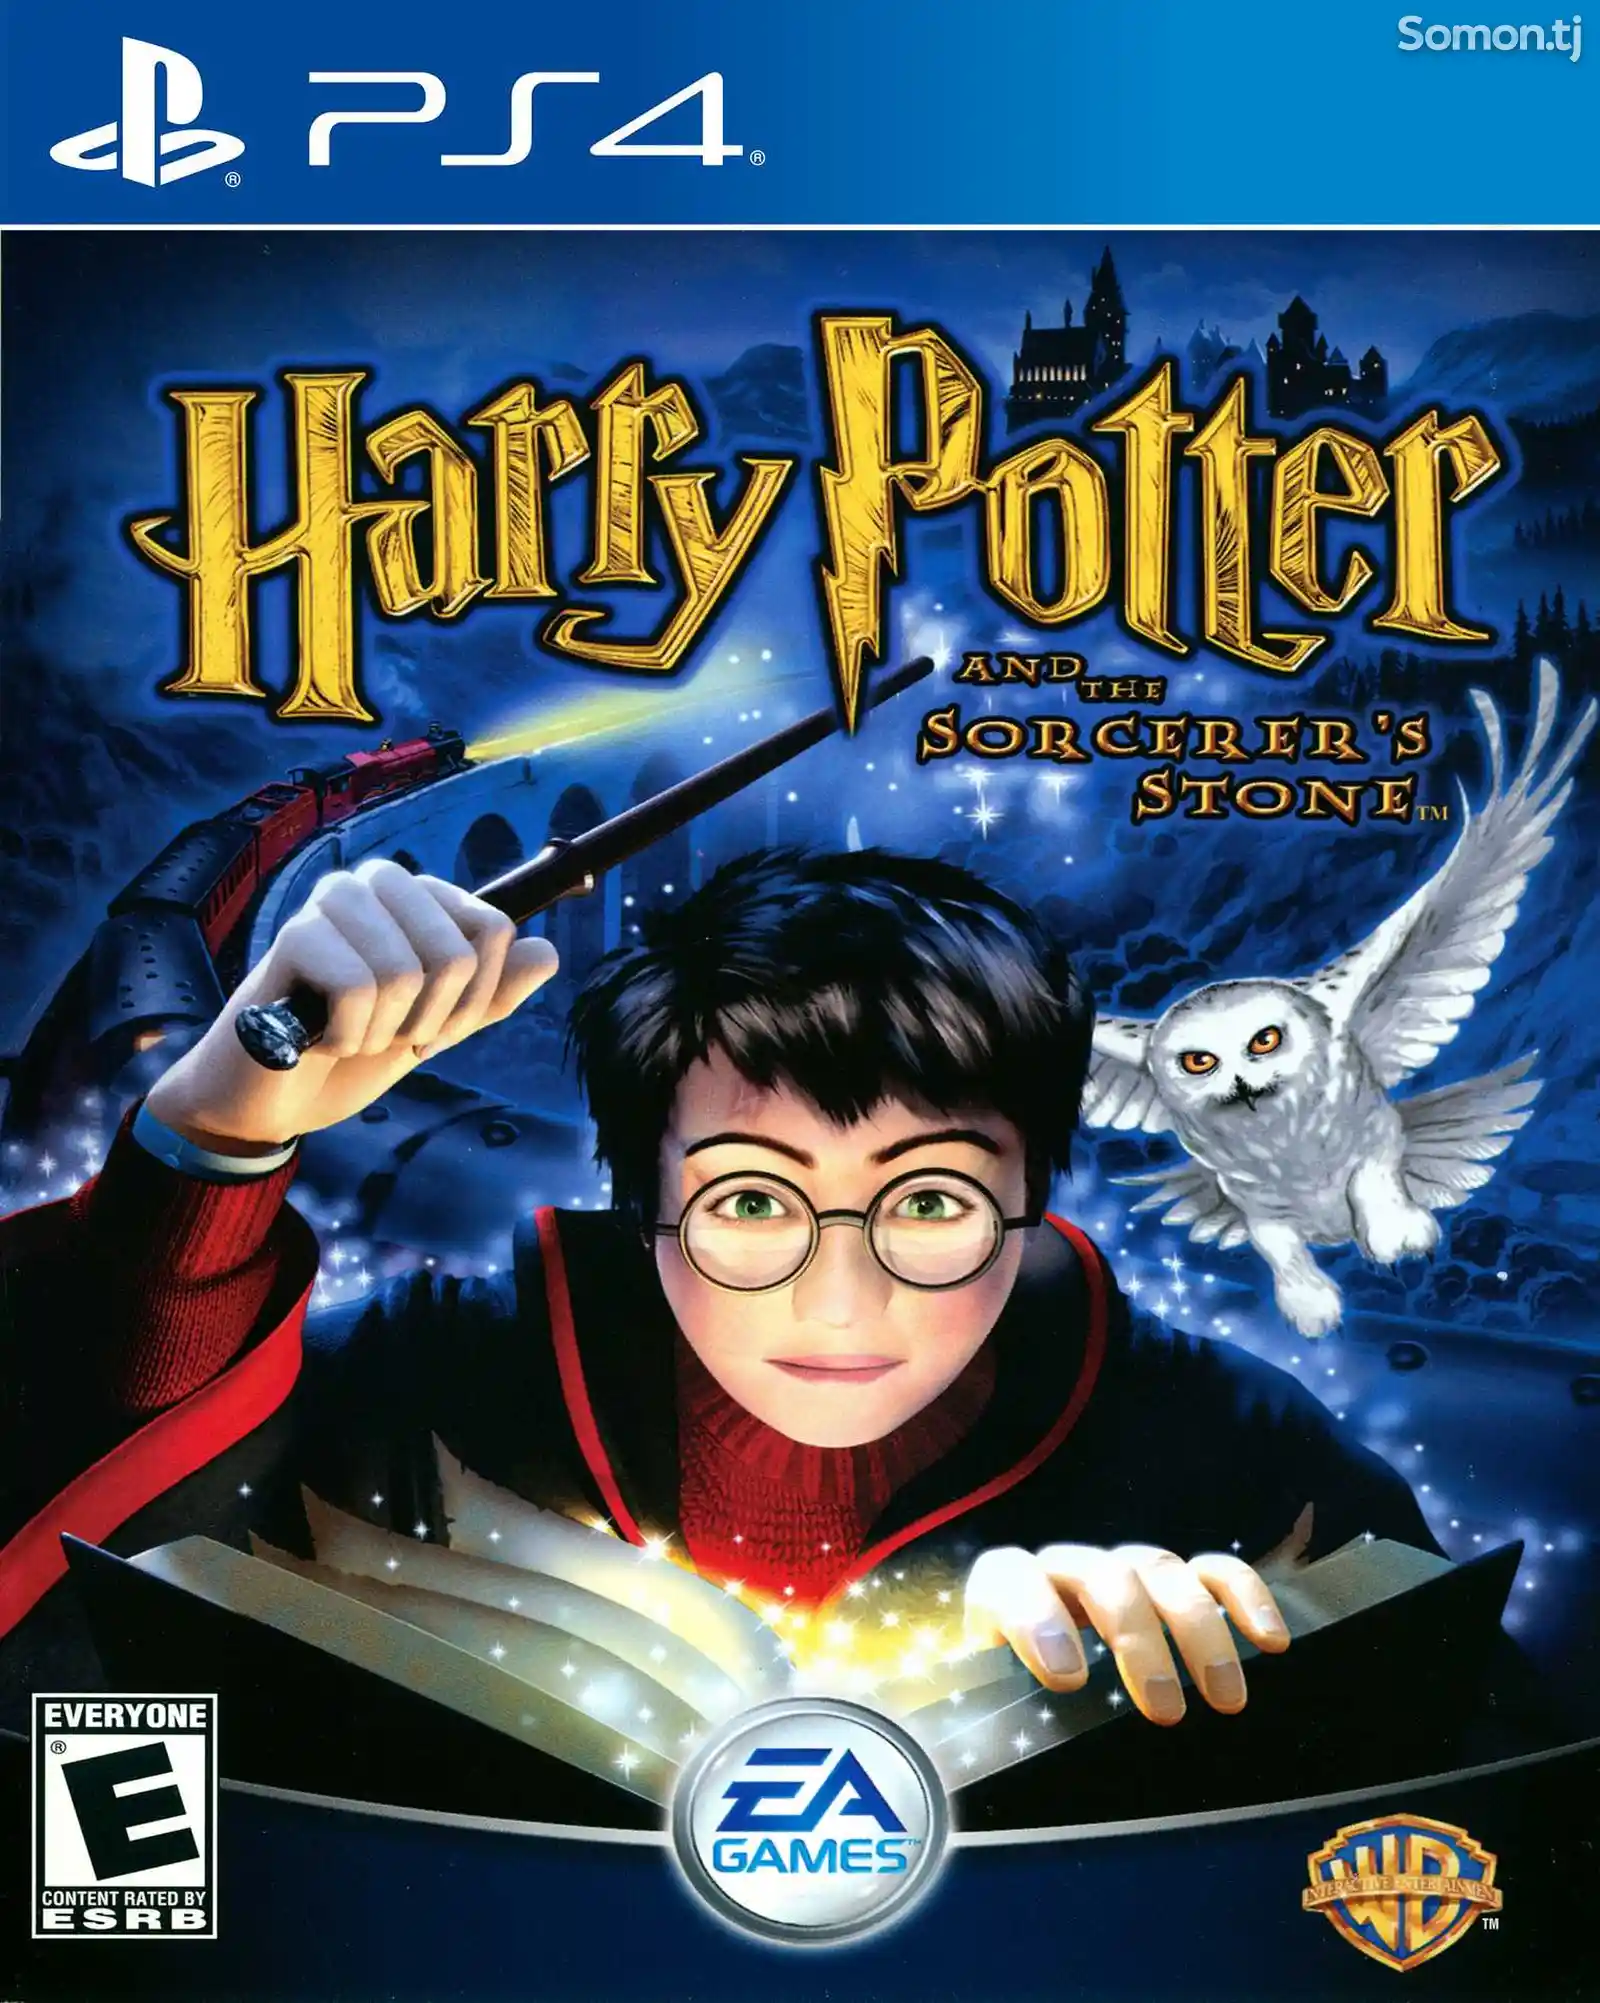 Игра Harry potter and the sorcerers stone для PS-4 / 5.05 / 6.72 / 7.02 / 9.00-1